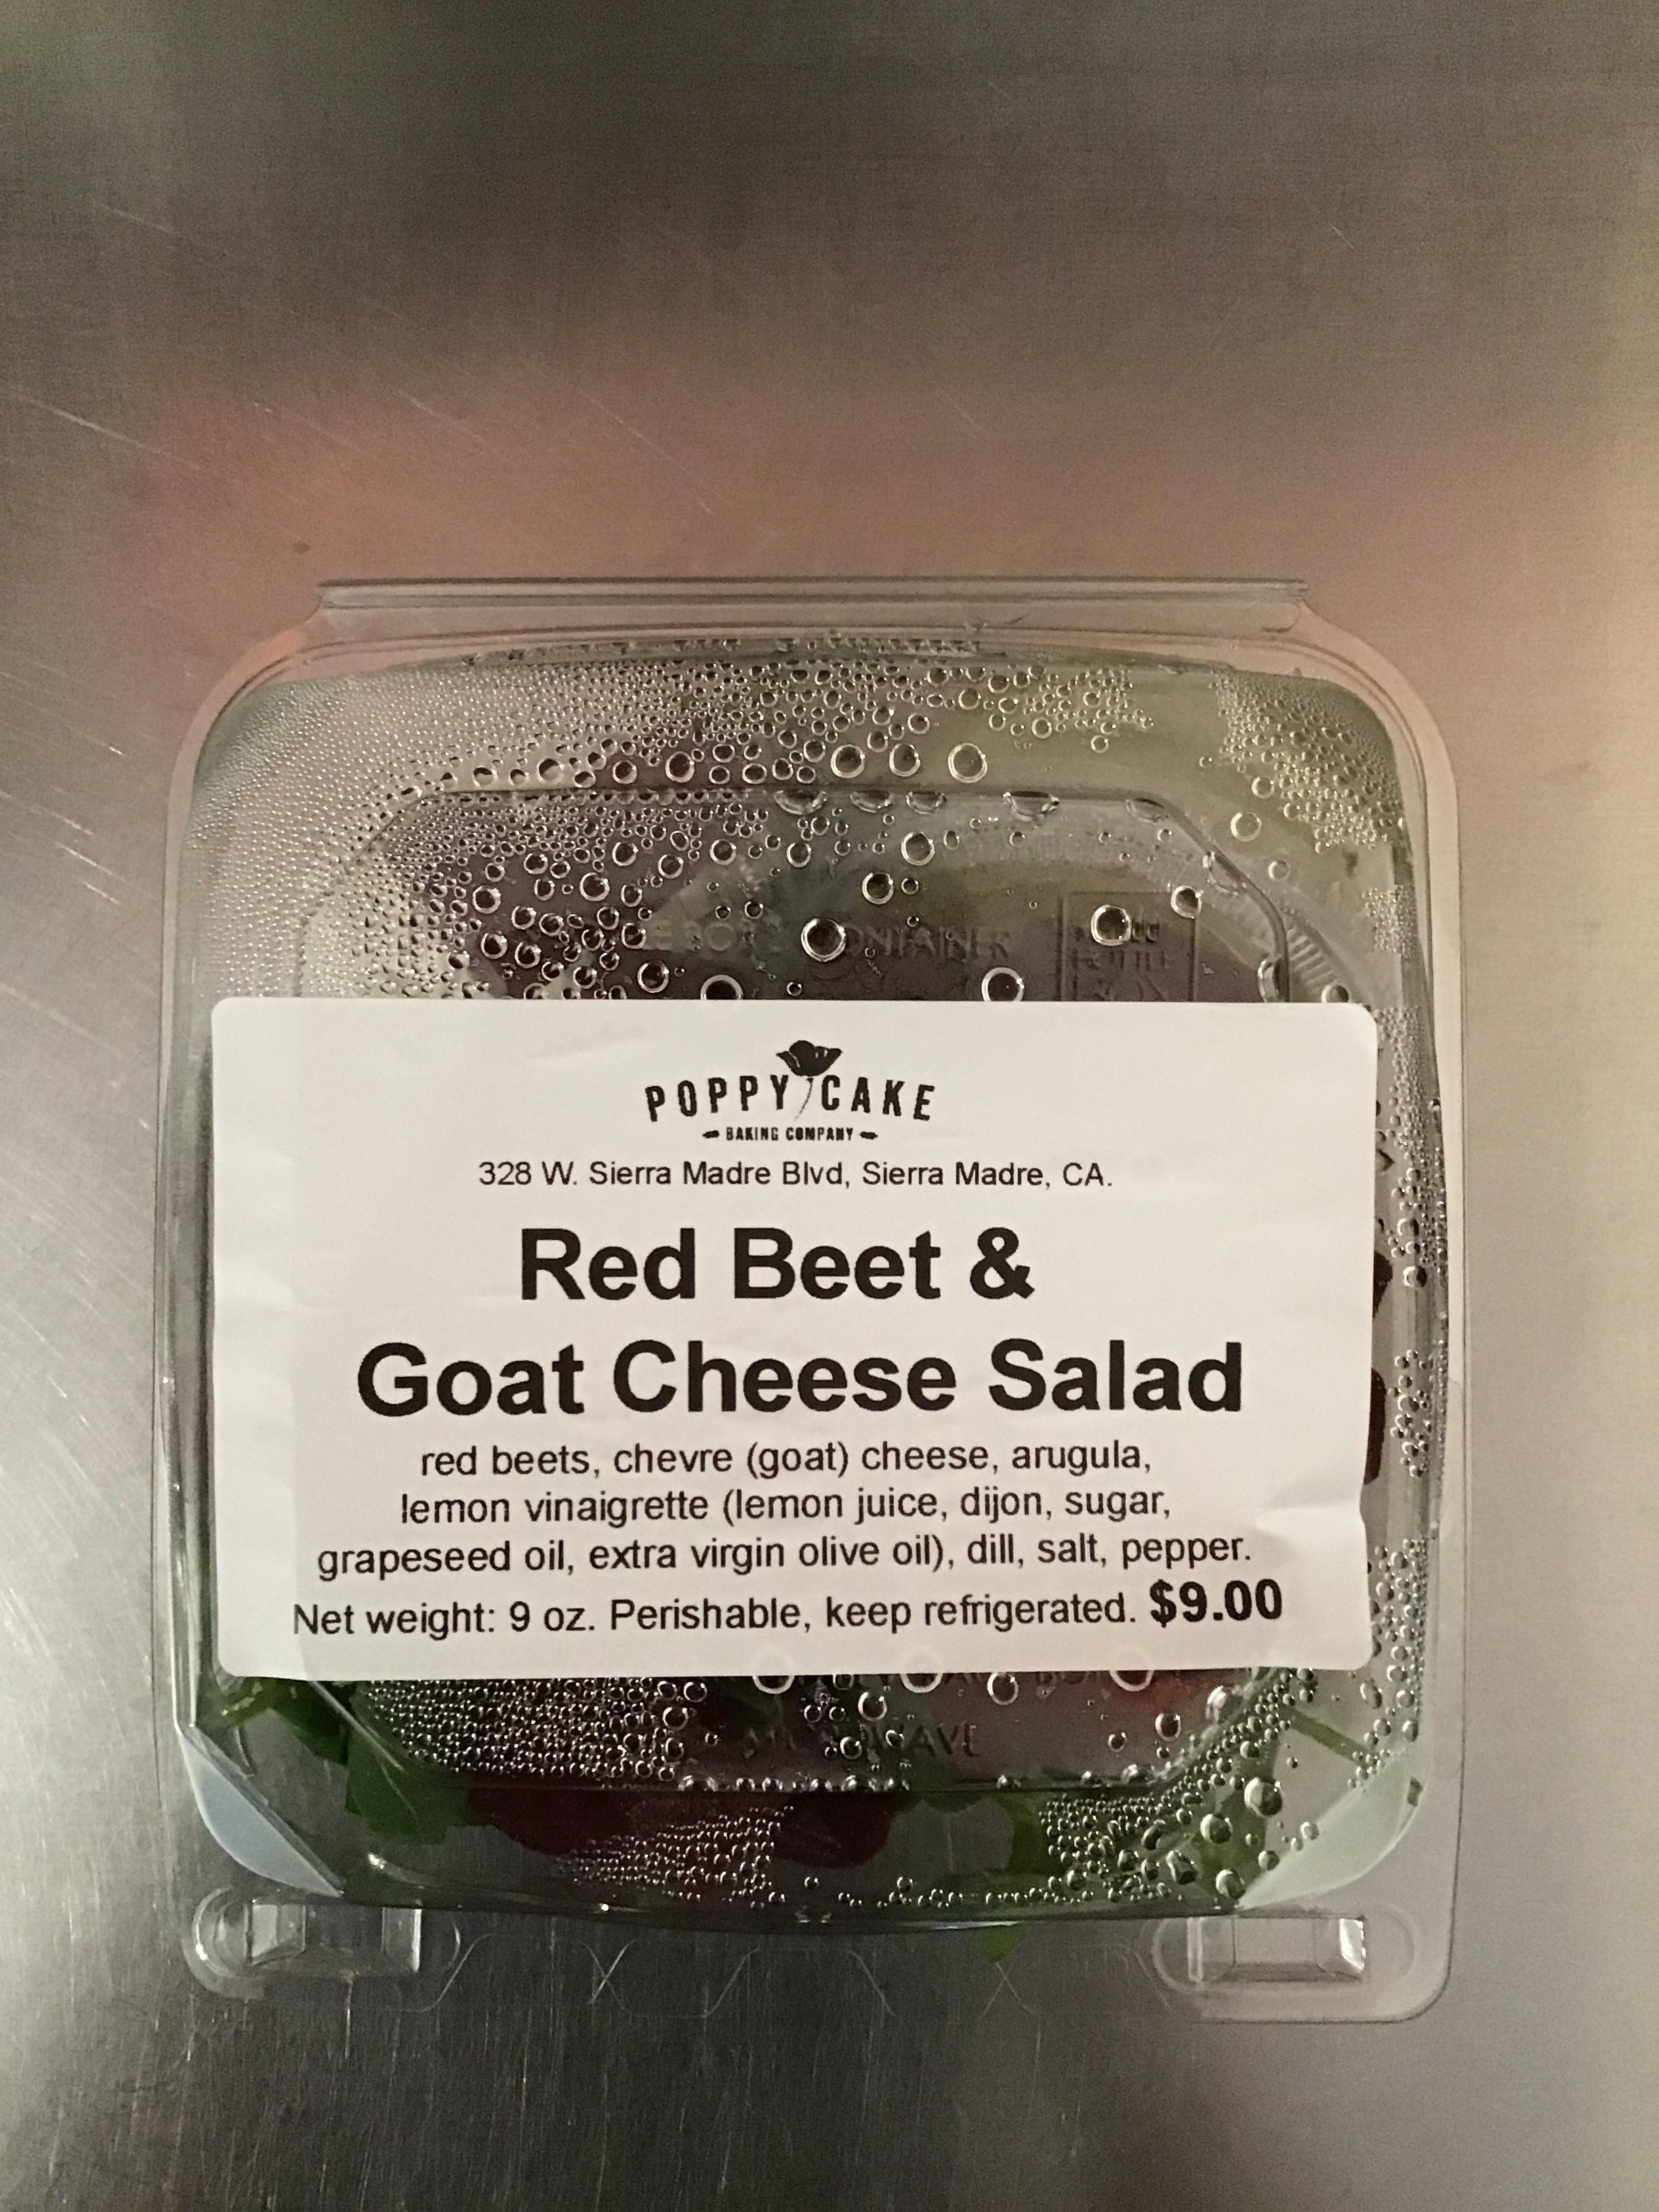 Red Beet & Goat Cheese Salad